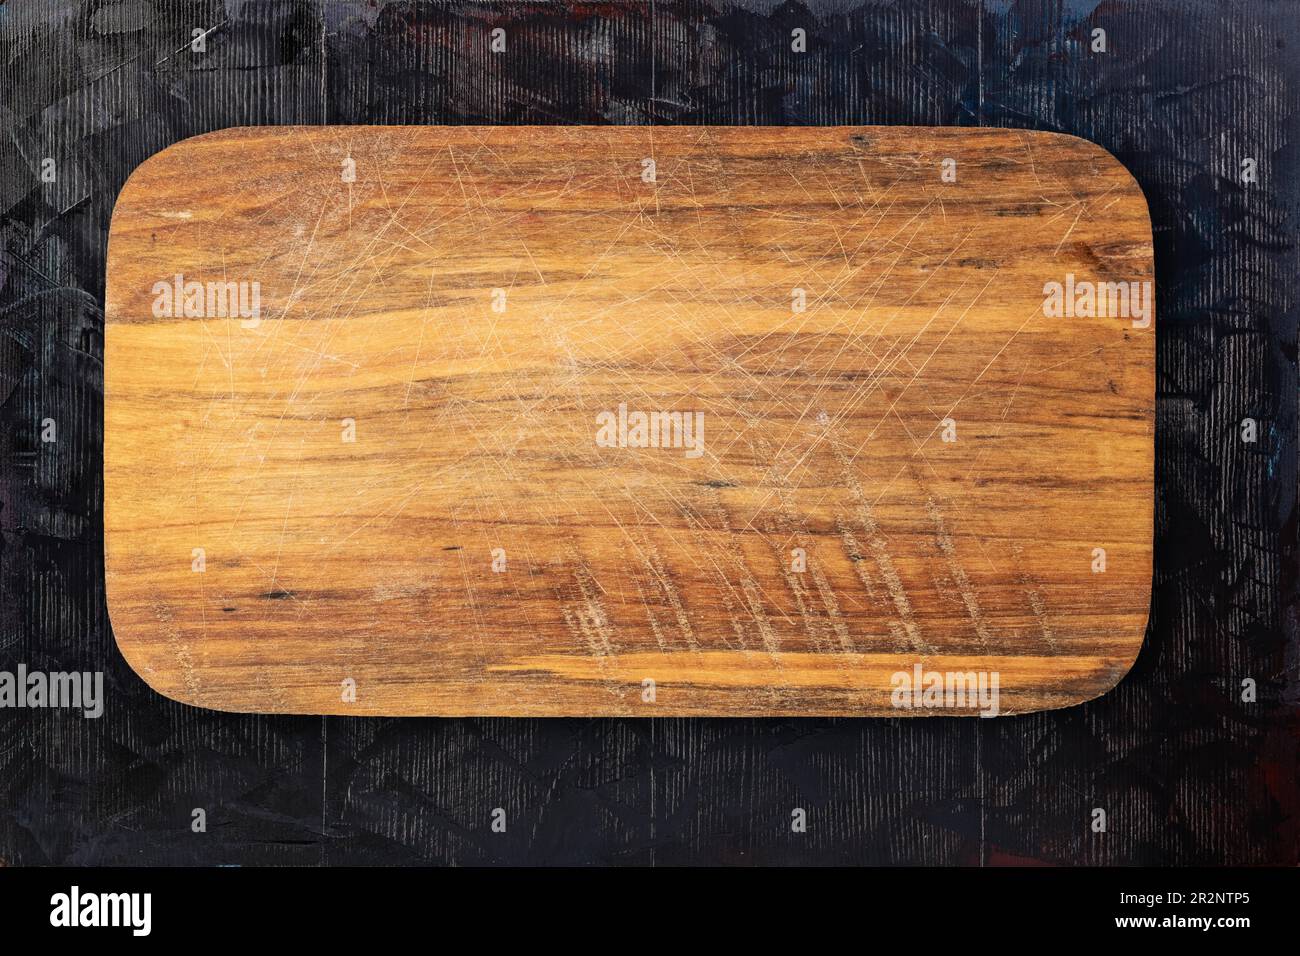 https://c8.alamy.com/comp/2R2NTP5/cutting-board-on-a-wooden-table-background-2R2NTP5.jpg